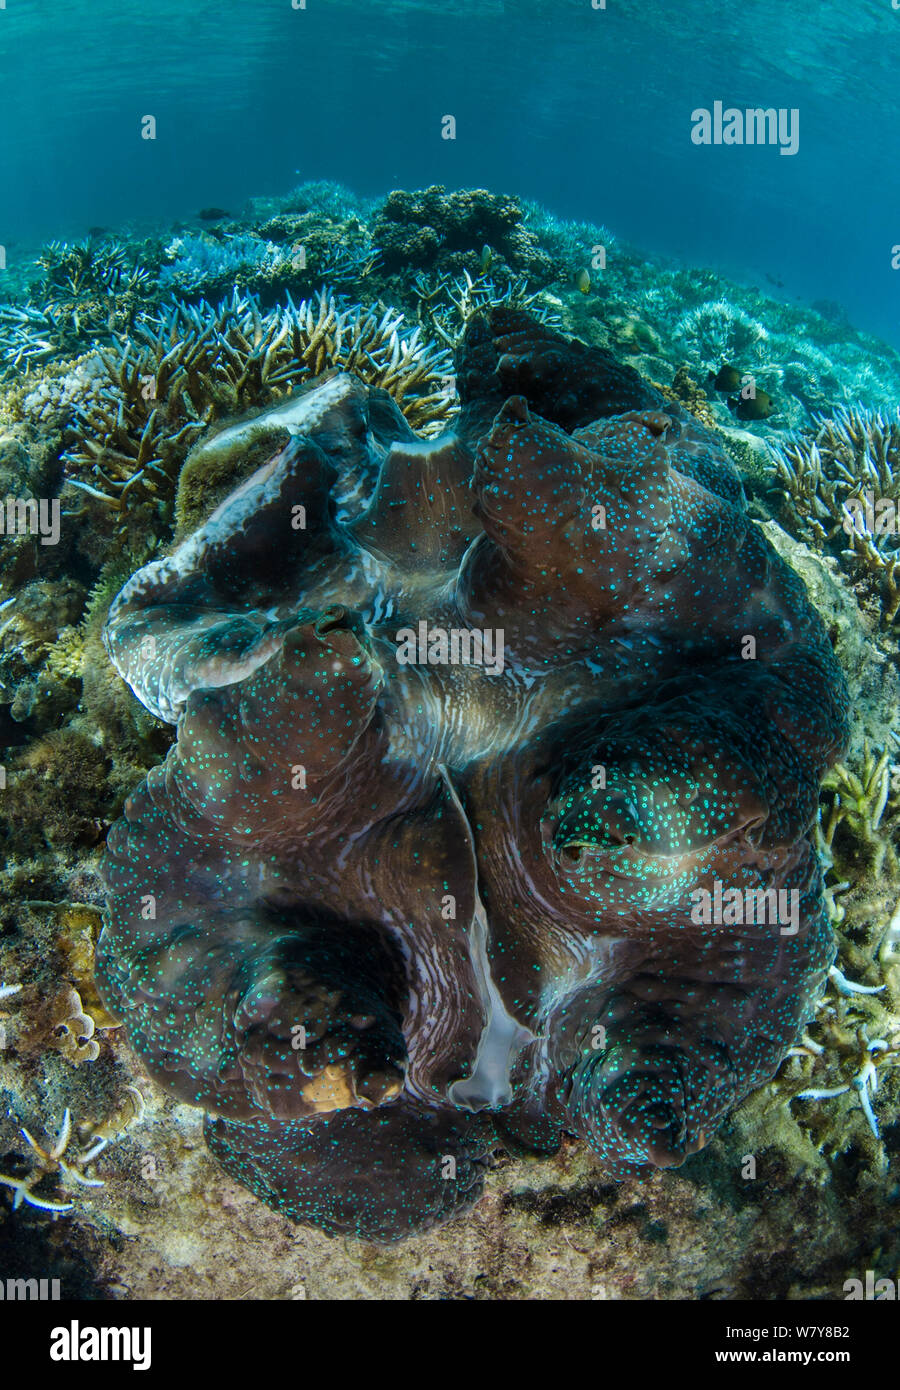 Giant clam (Tridacna gigas) open, showing mantle. Fiji, South Pacific. Stock Photo